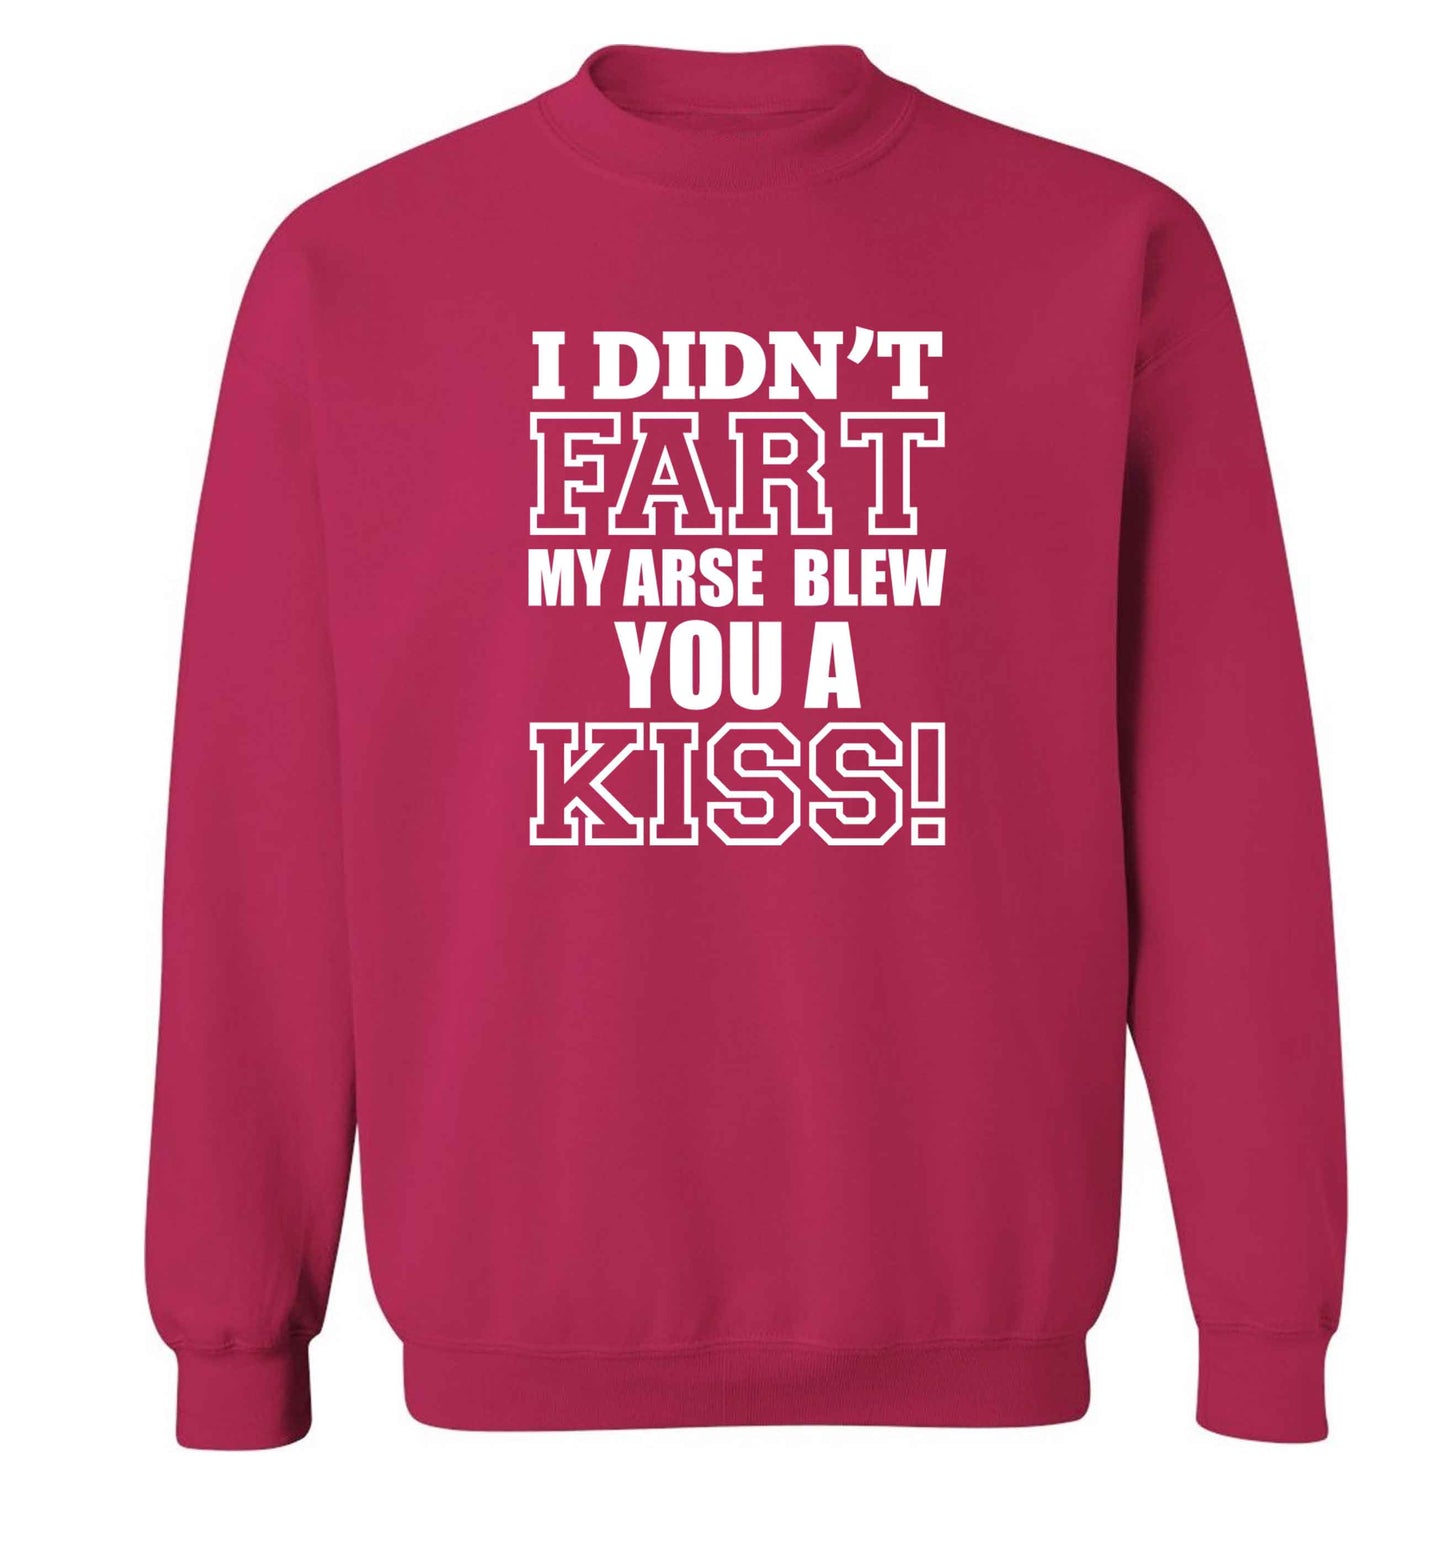 I didn't fart my arse blew you a kiss adult's unisex pink sweater 2XL